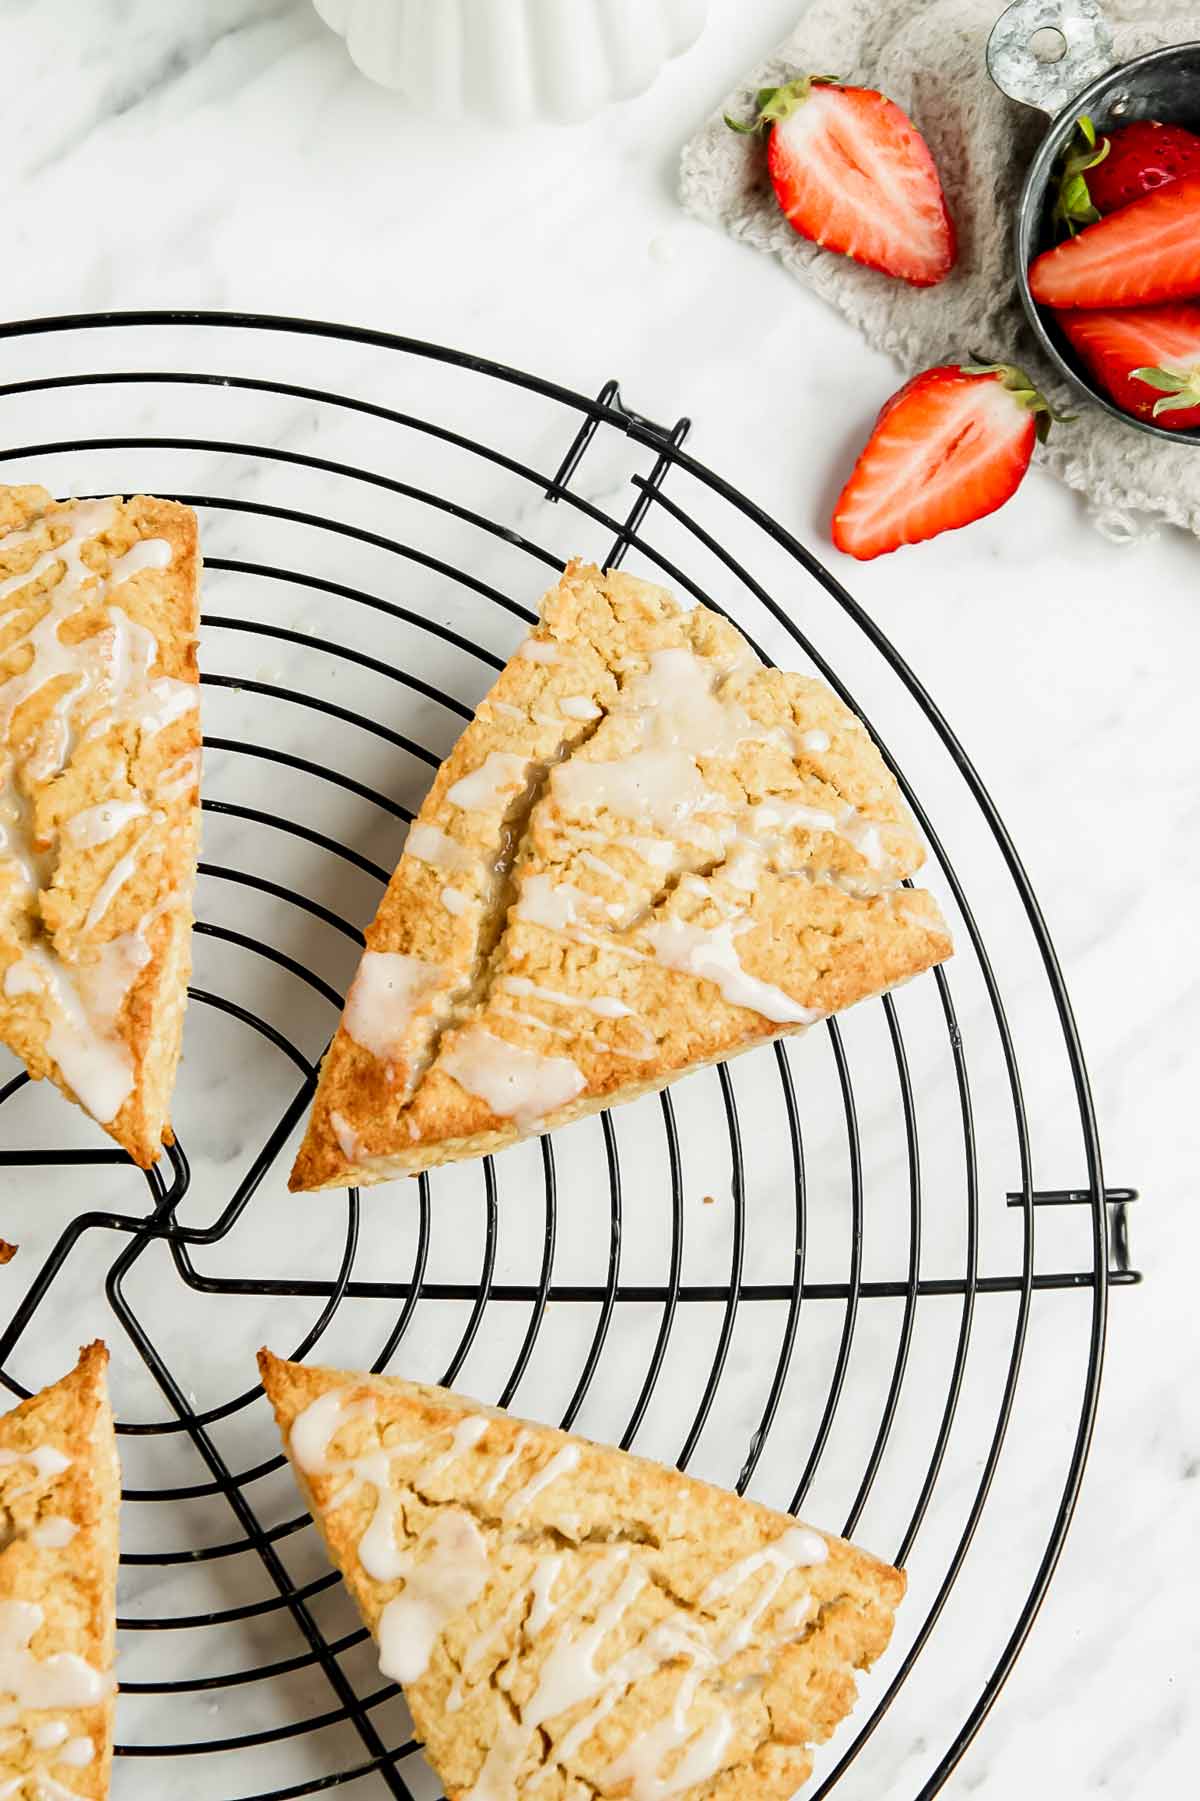 Coconut flour scones on circular wire rack, strawberries on the side